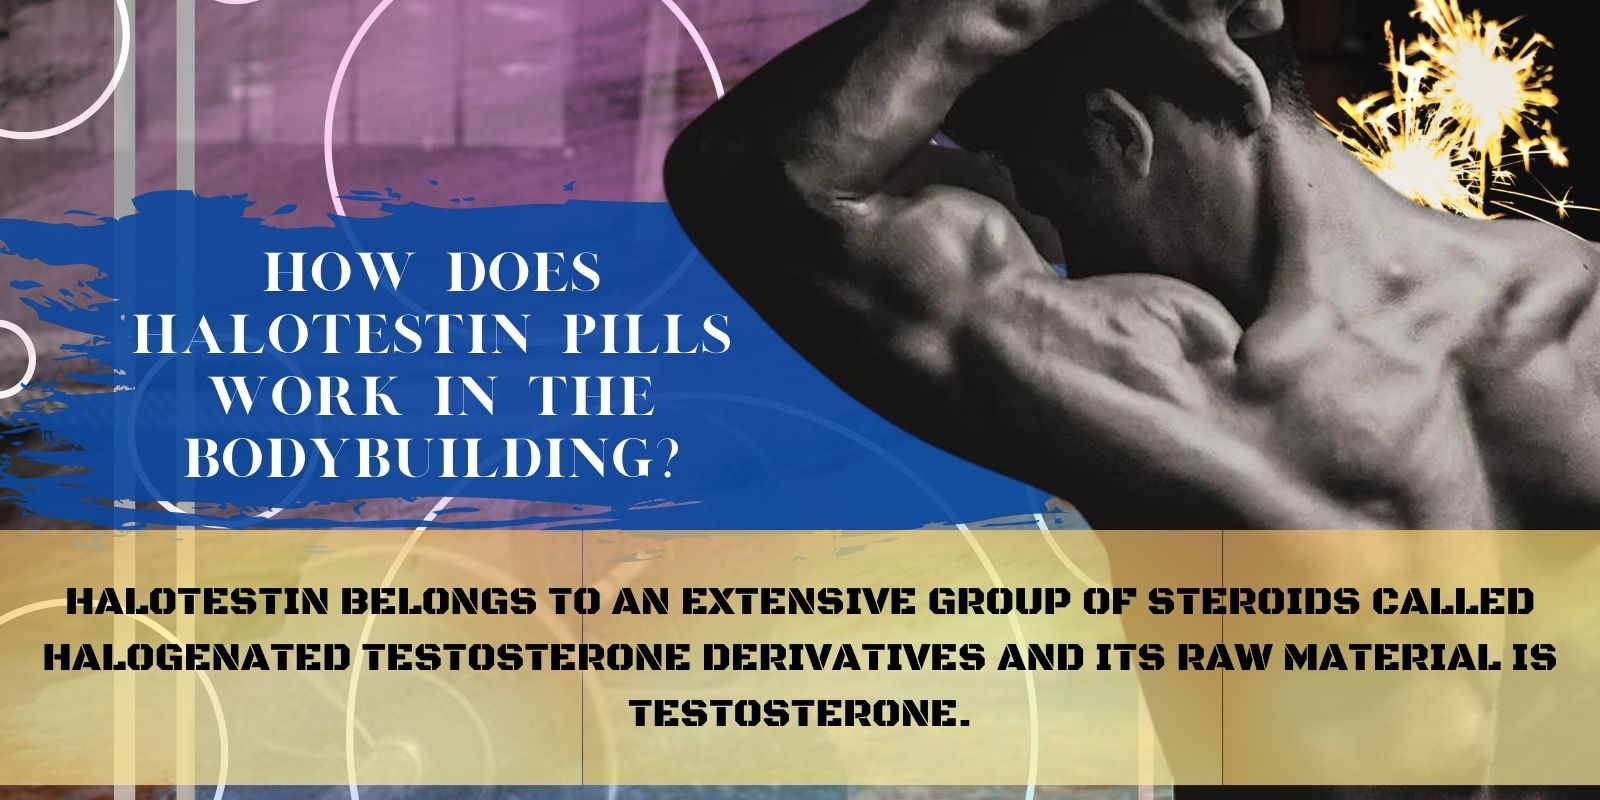 How does Halotestin pills work in the bodybuilding_